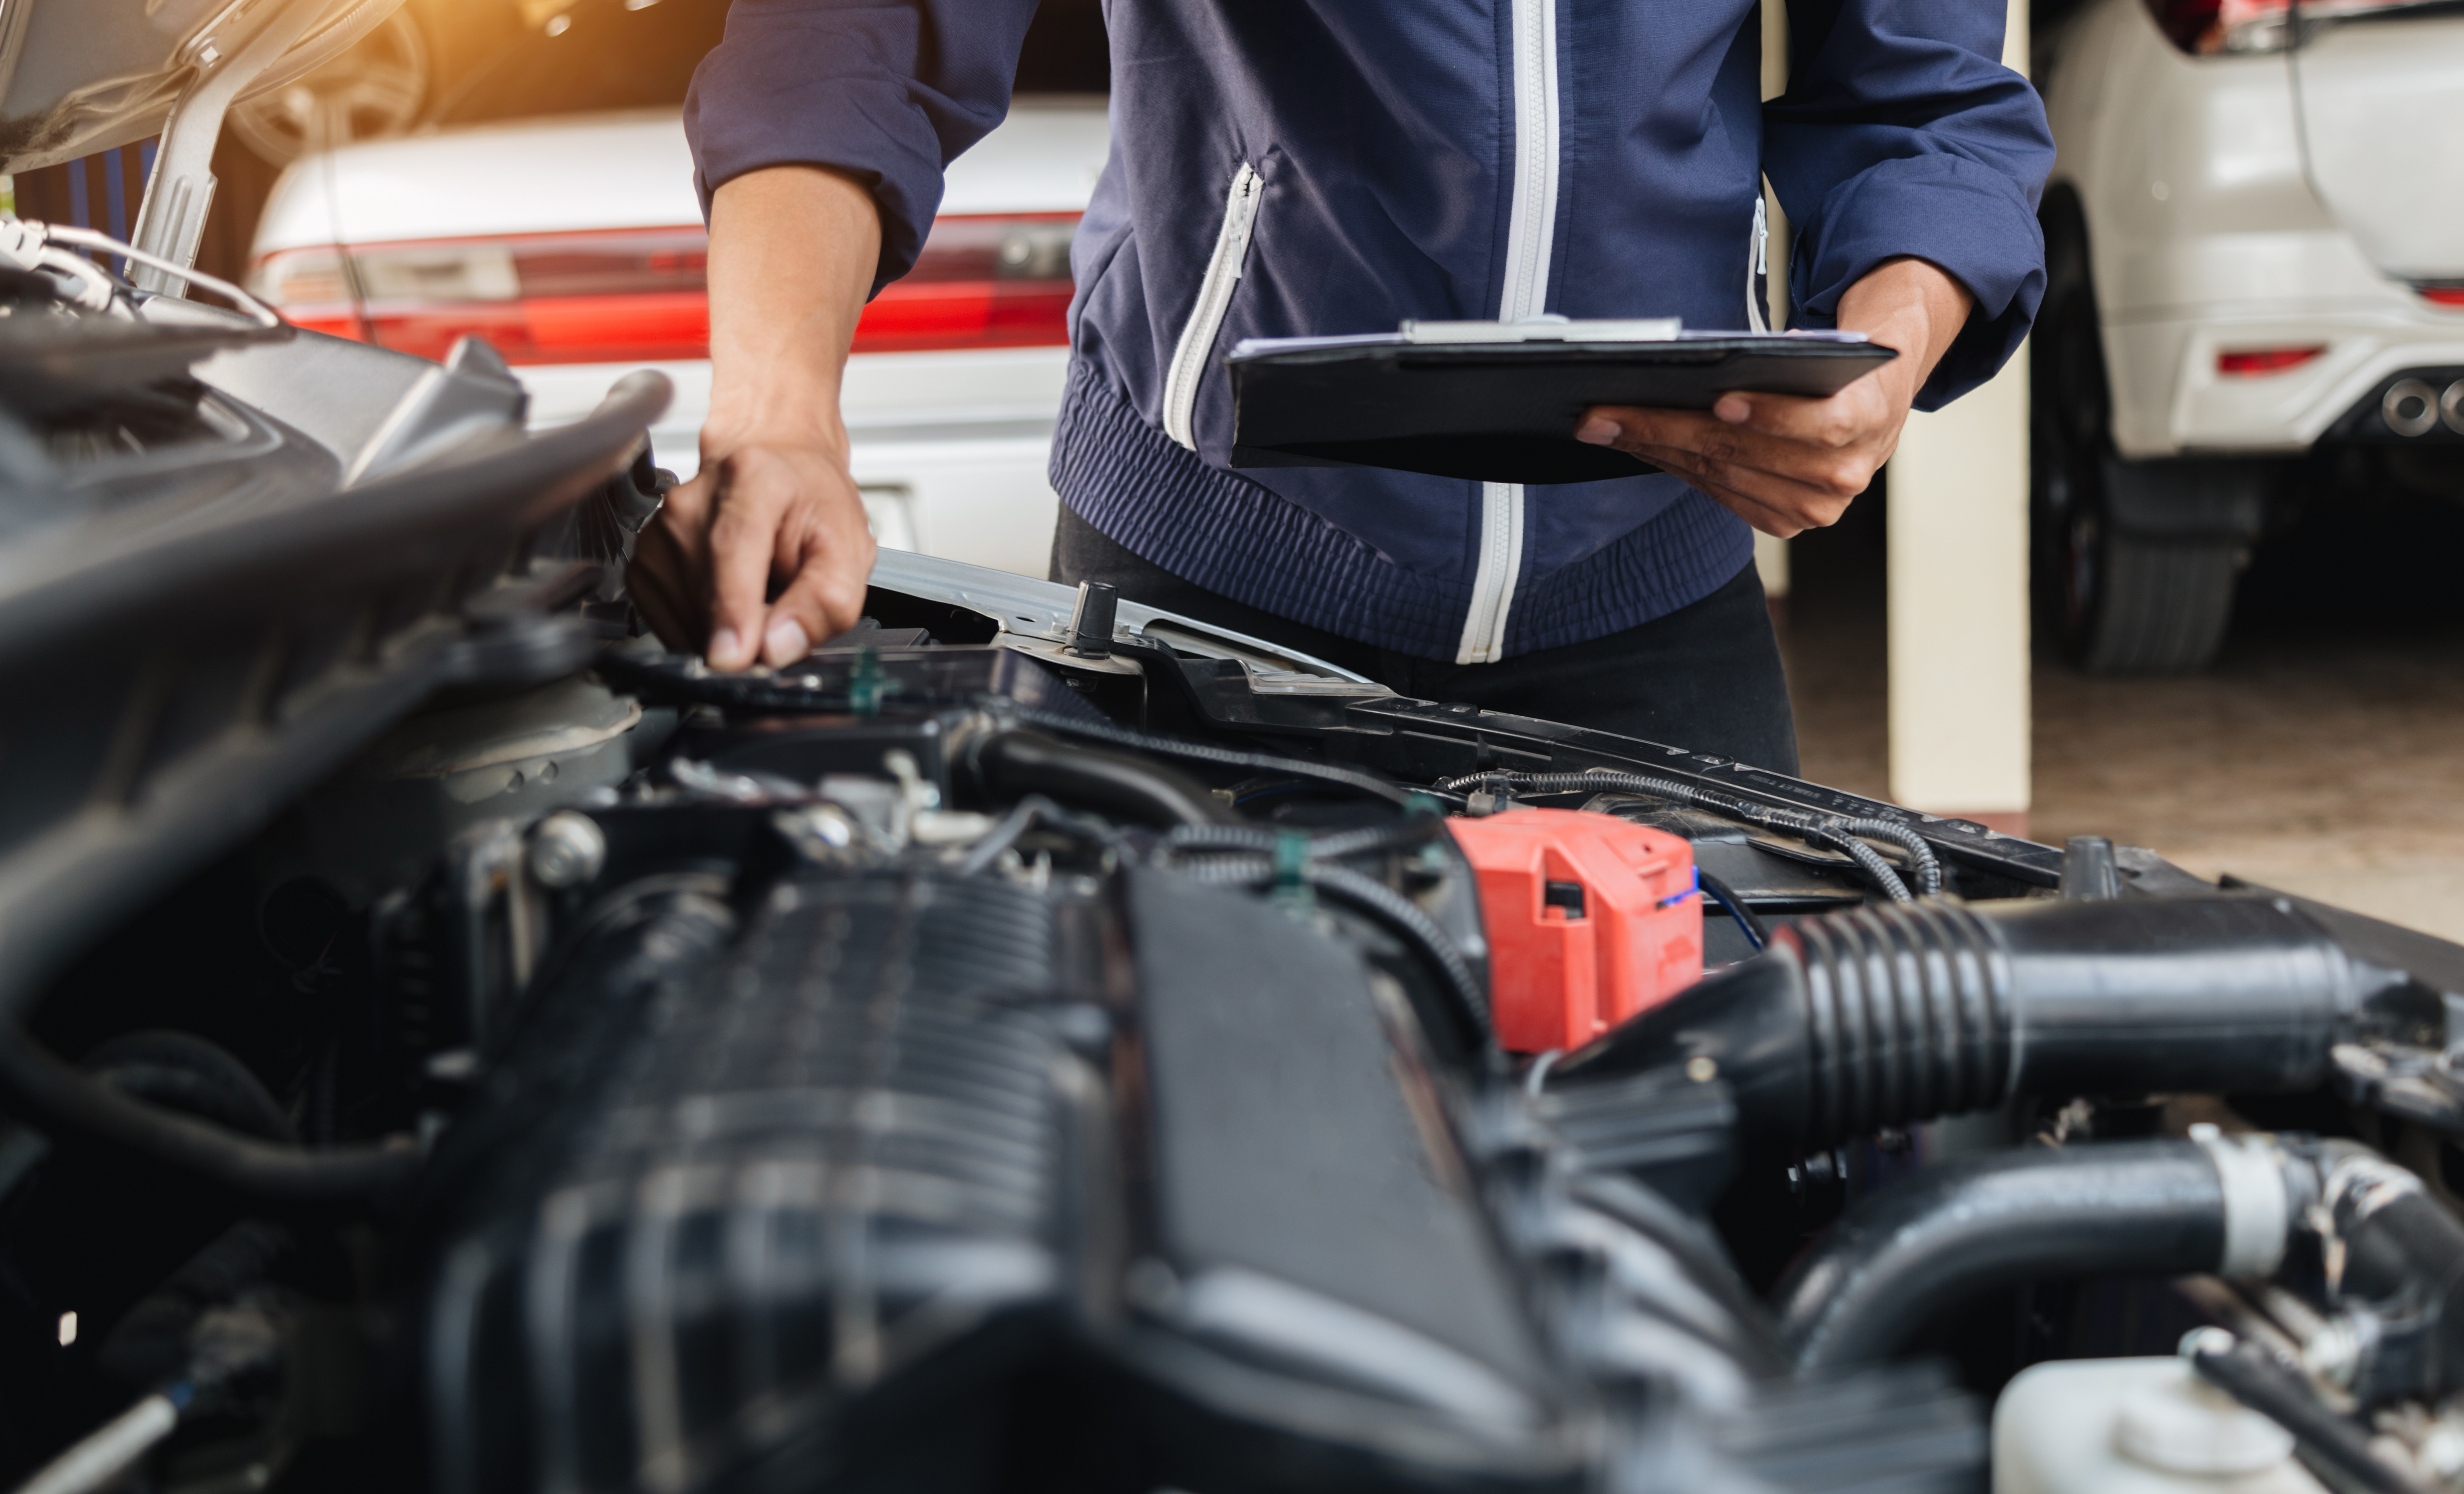 3 Vehicle Part & System Inspections You Shouldn't Miss